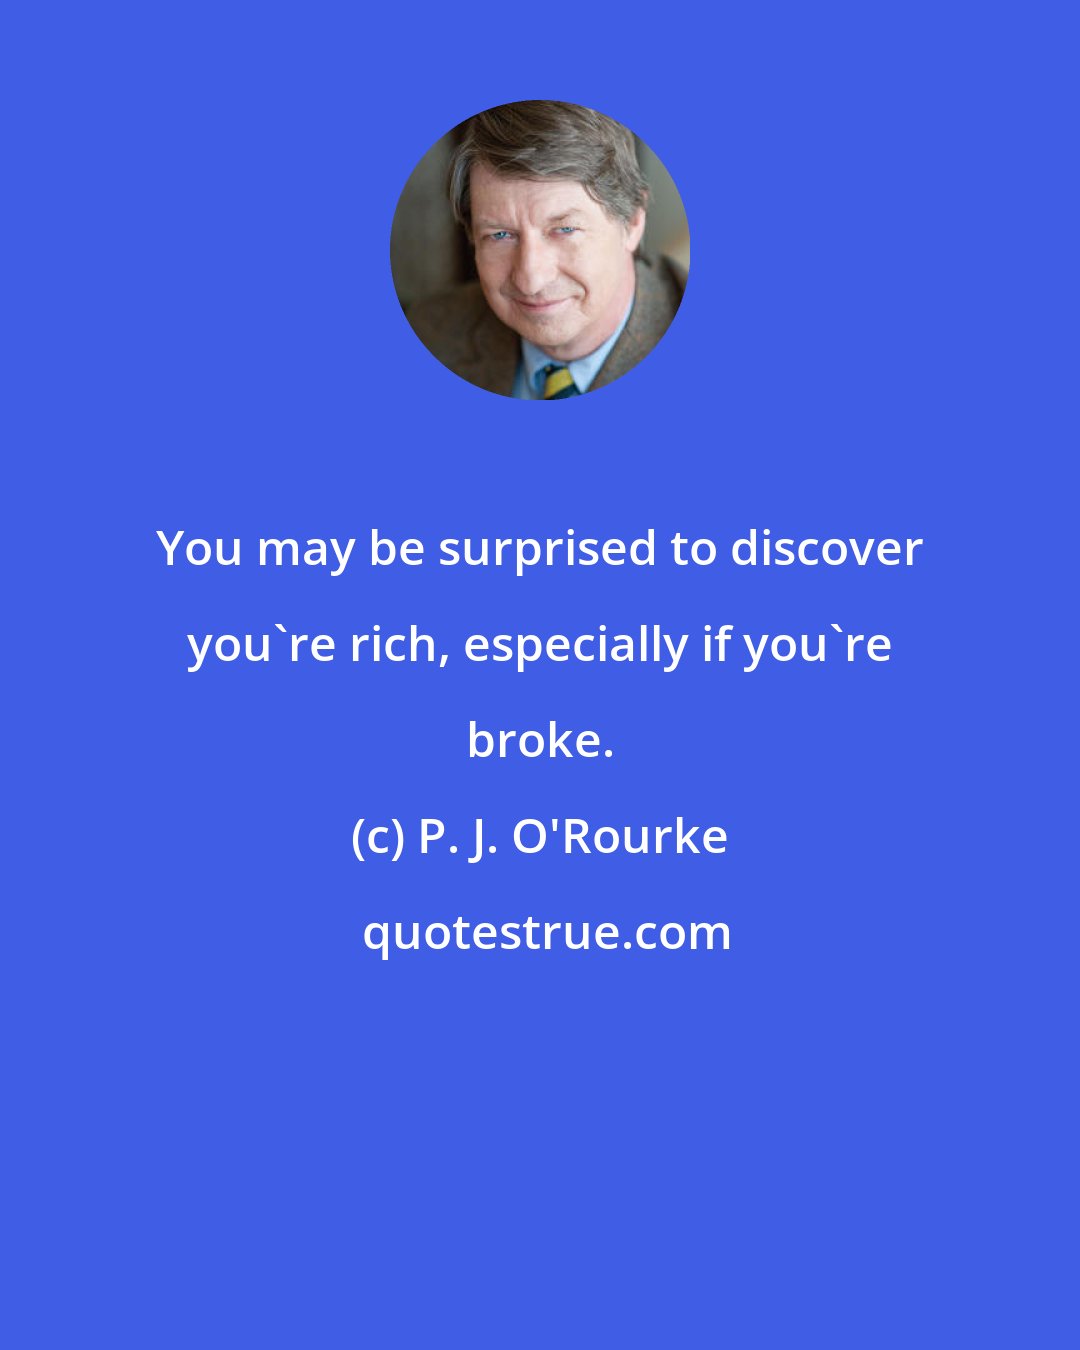 P. J. O'Rourke: You may be surprised to discover you're rich, especially if you're broke.